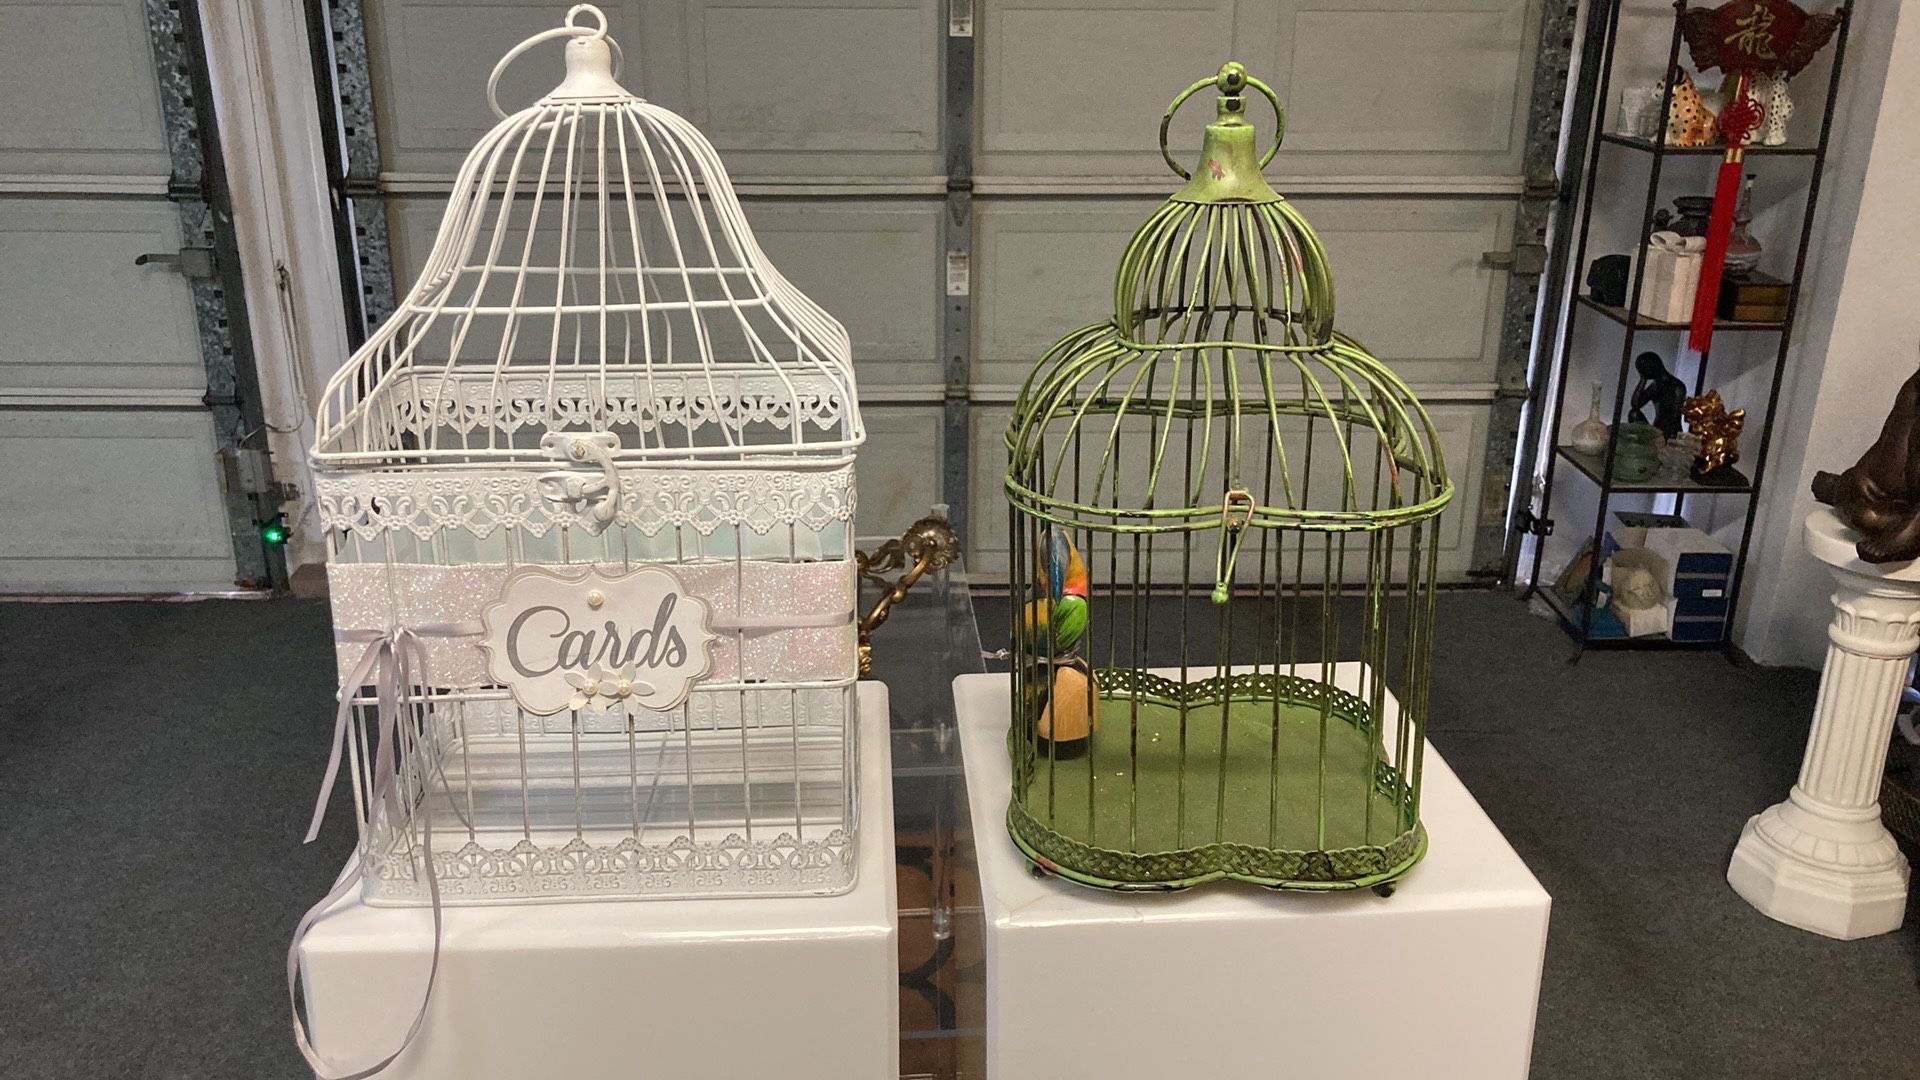 $30 EA BEAUTIFUL VINTAGE White Metal Birdcage For Decoration Or For Plant, Candle, Bird Statue, Wedding Cards, Etc. White Is 19” Tall X 10.5” Wide.  